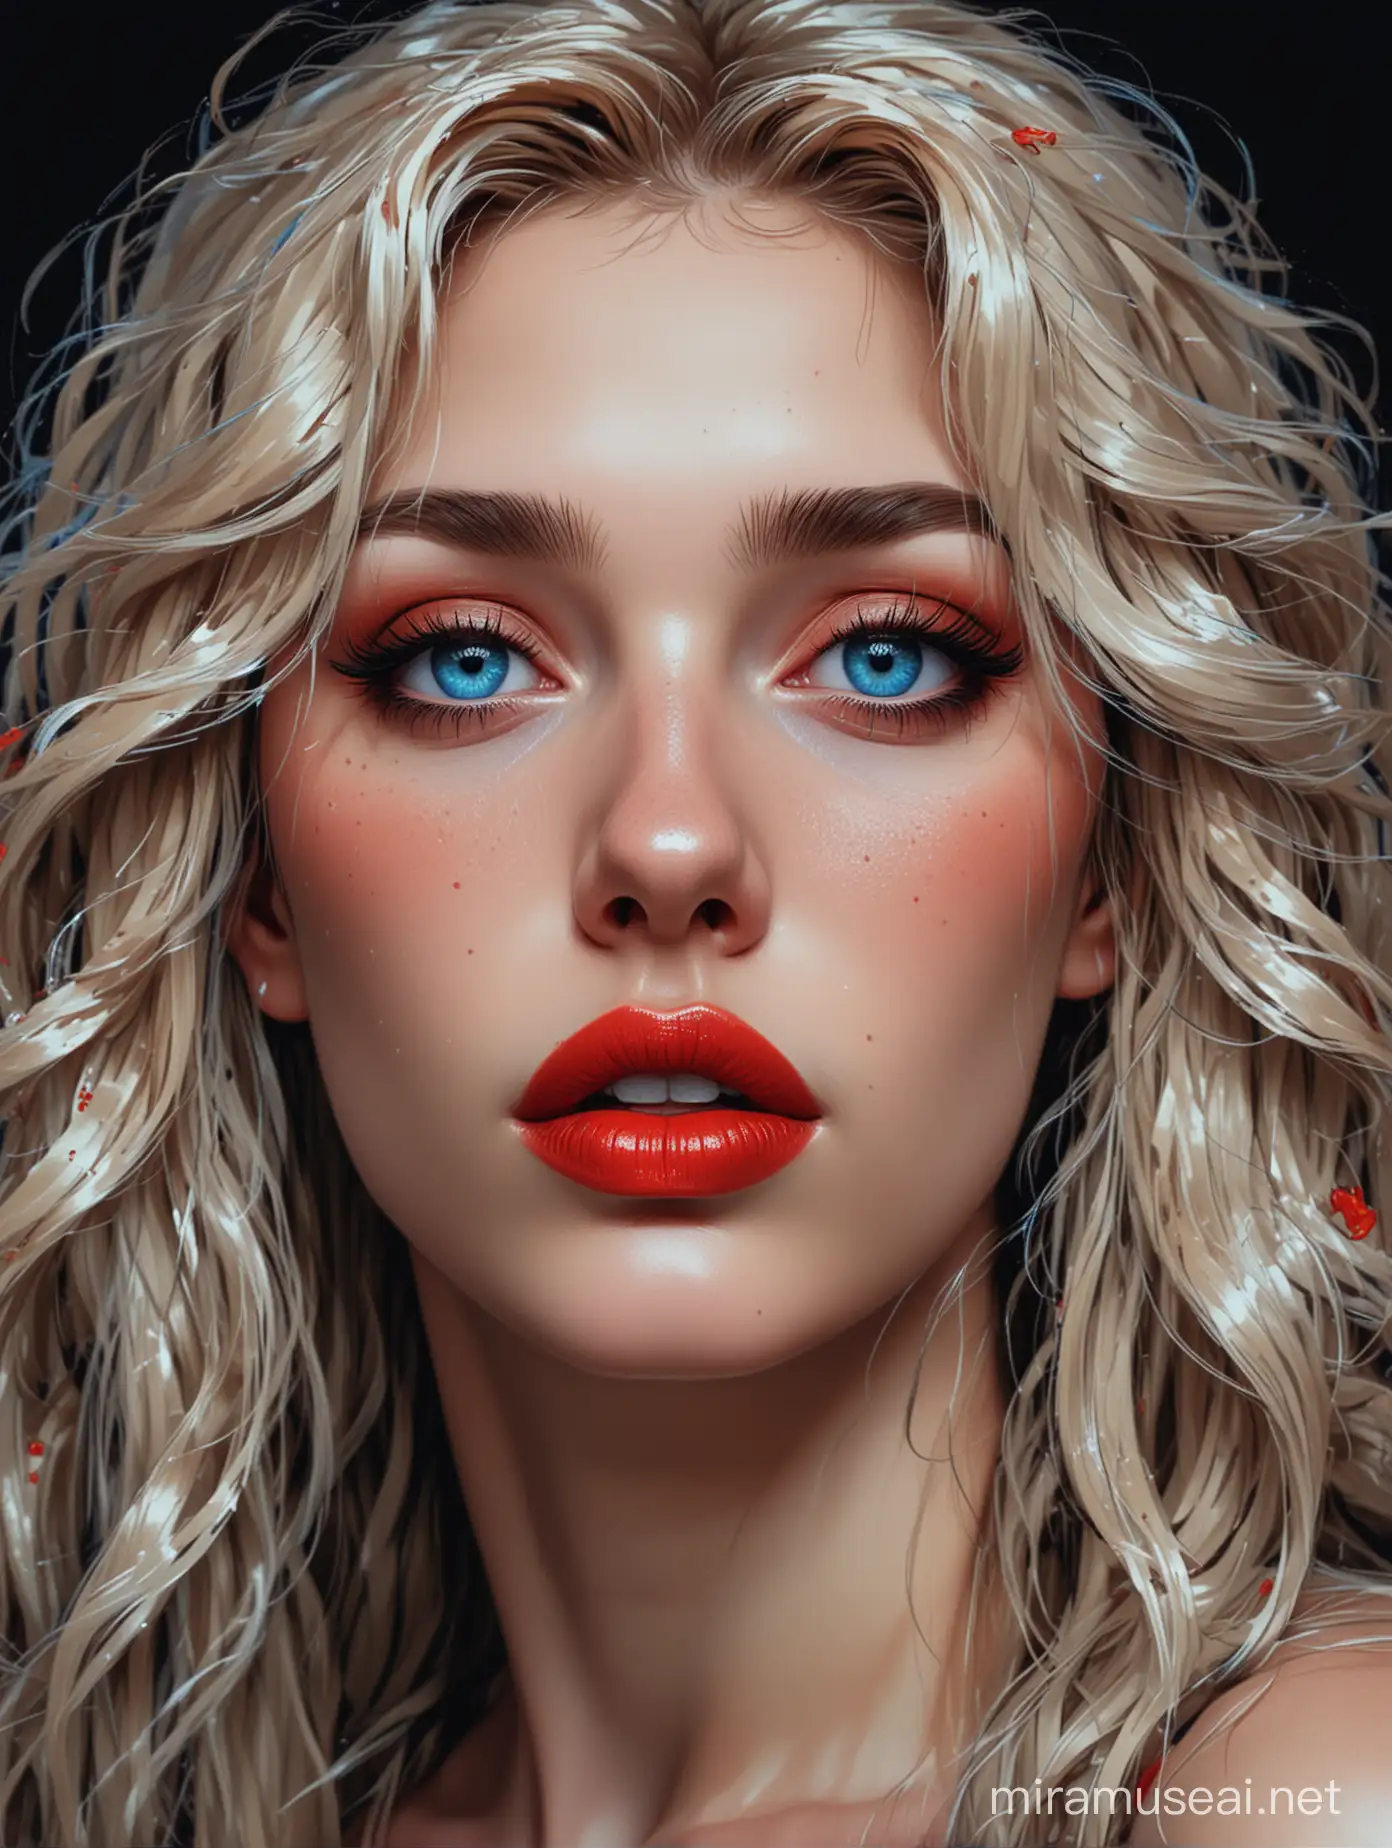 Pixel art, Alviision , Inside the most beautiful people are often hidden deep depression and eyes full of sadness . a woman with long hair falling over her shoulders , full red lips , by Michelangelo . Realistic , ultra - detailed , blue eyes . Sorrow , sadness in her look, strong neon colors